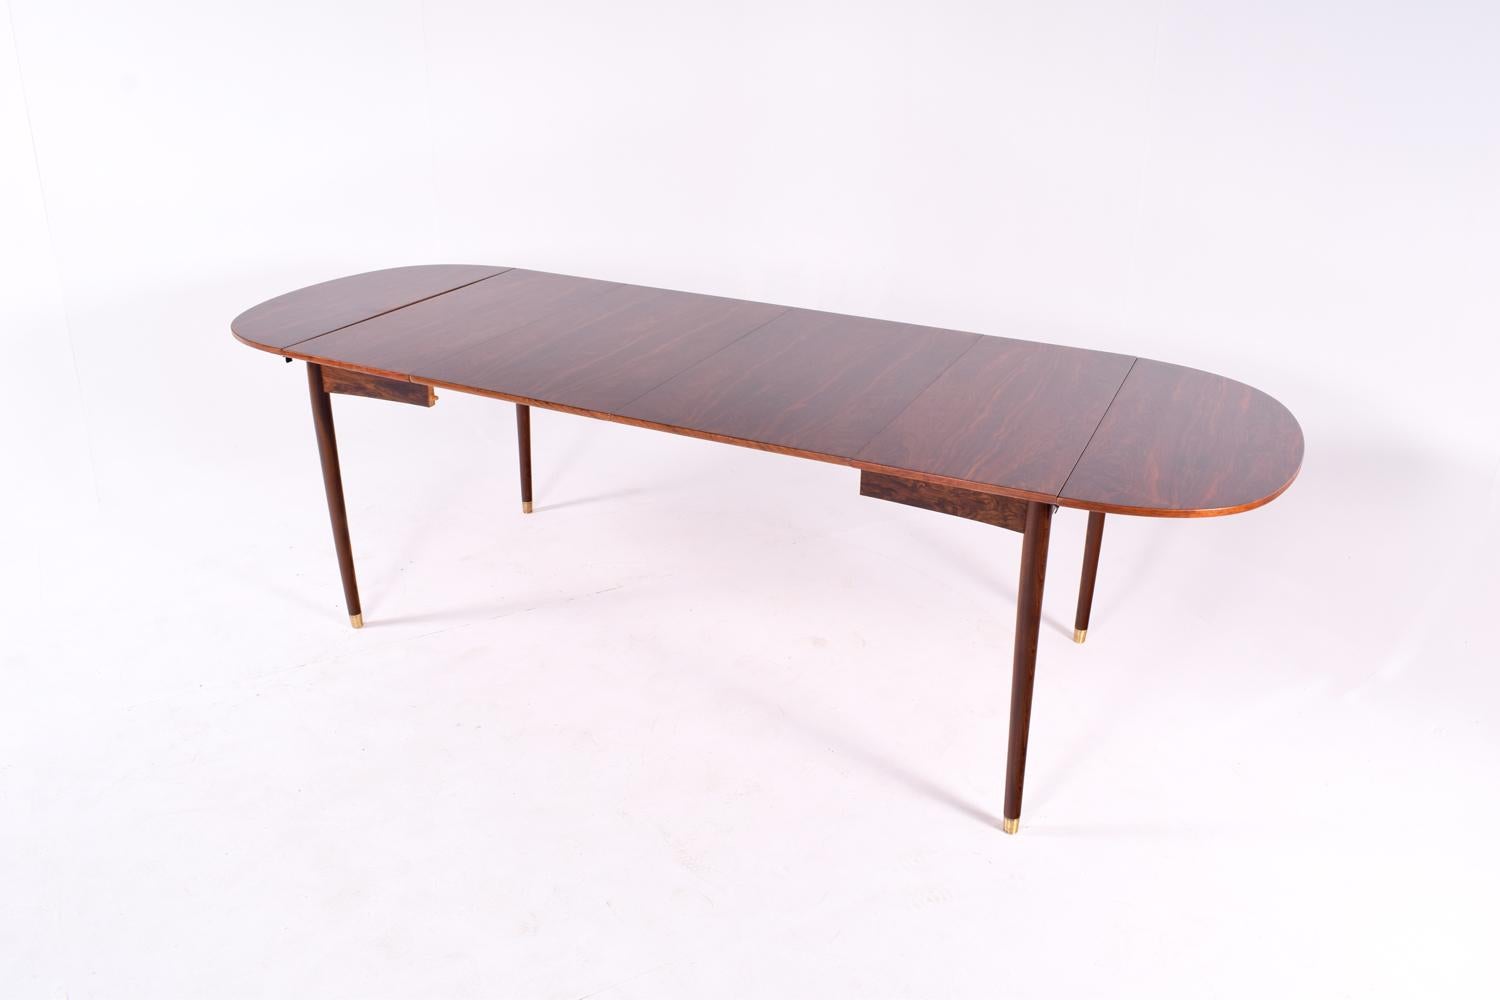 Danish modern rosewood drop-leaf extension dining table. Table has 2 ends that drop down with 38 cm each to the sides along with 2 removable 50 cm leaves. Elegant and appealing rosewood veneer, leaf draw matching between all leaves.